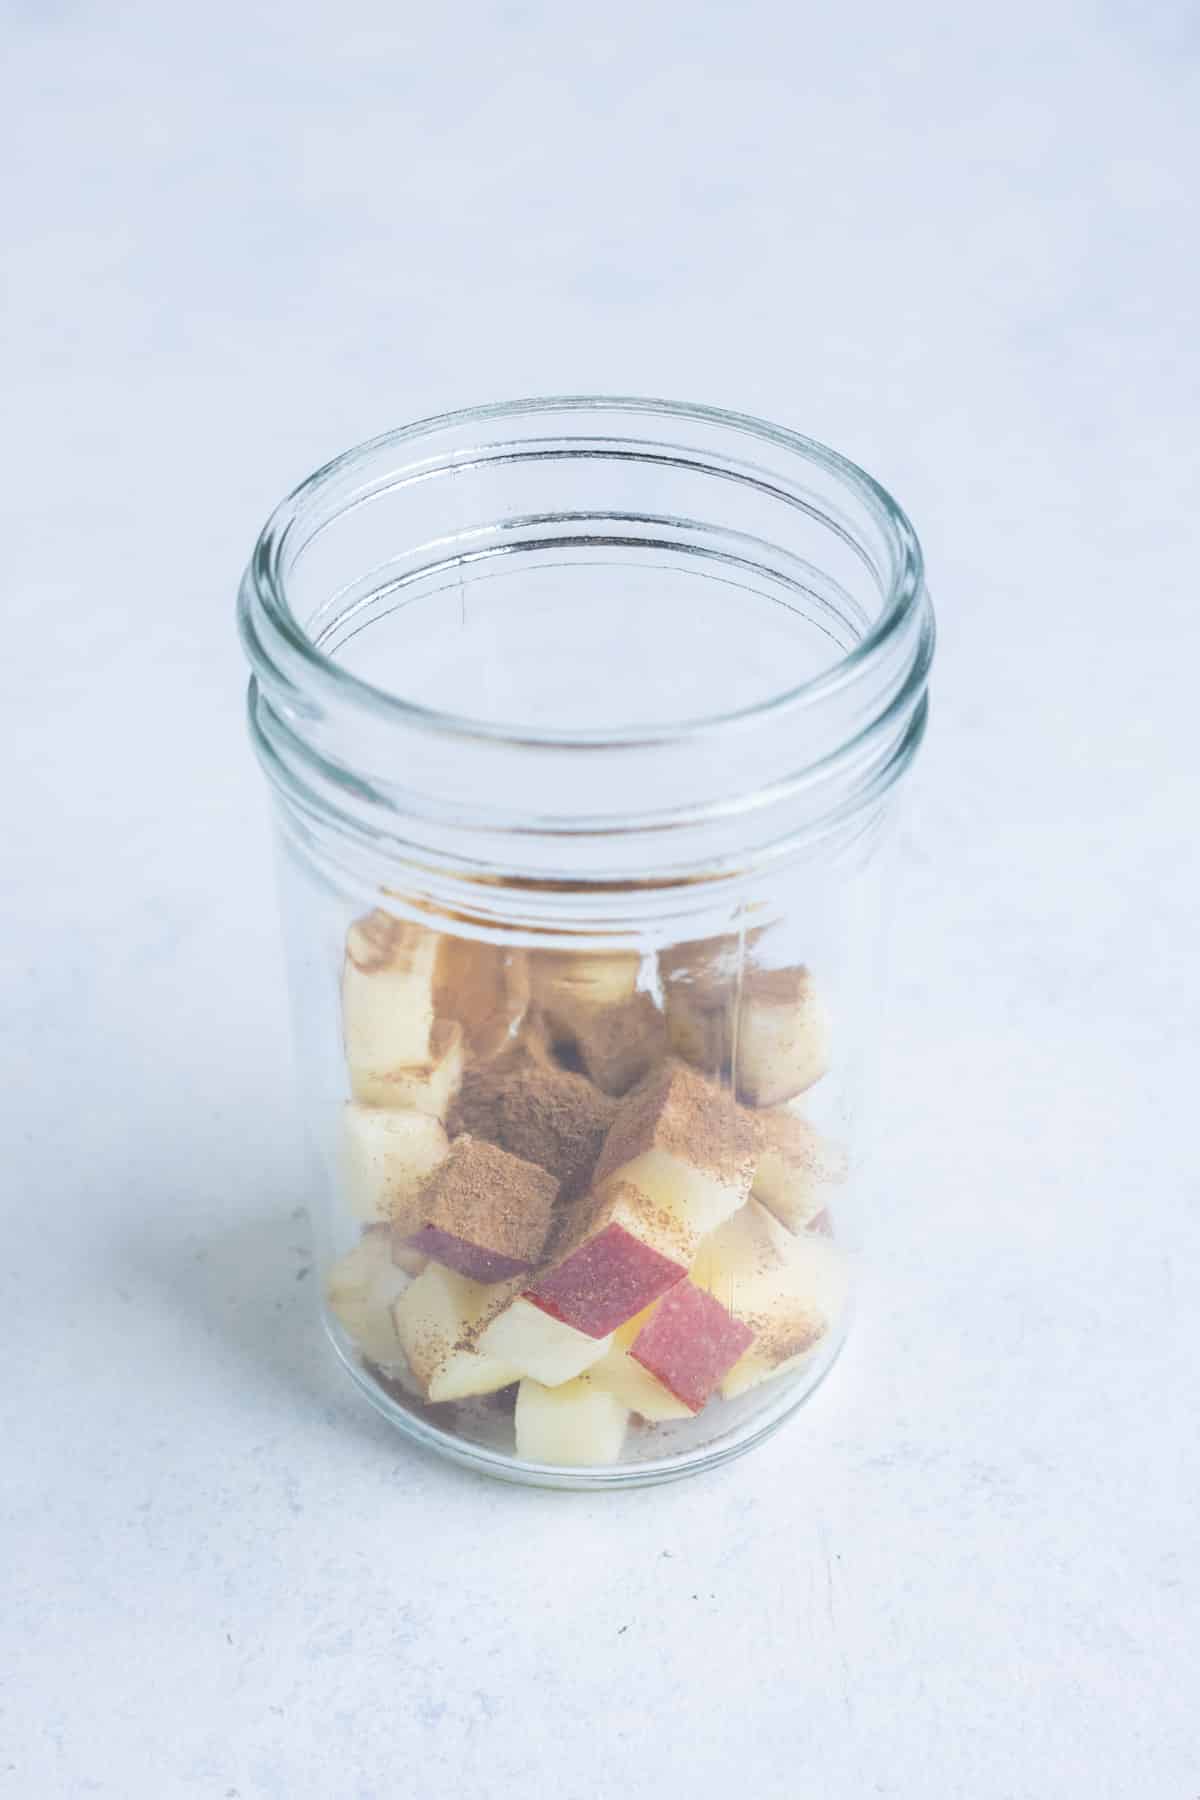 Apples and spices are in the bottom of the jar.